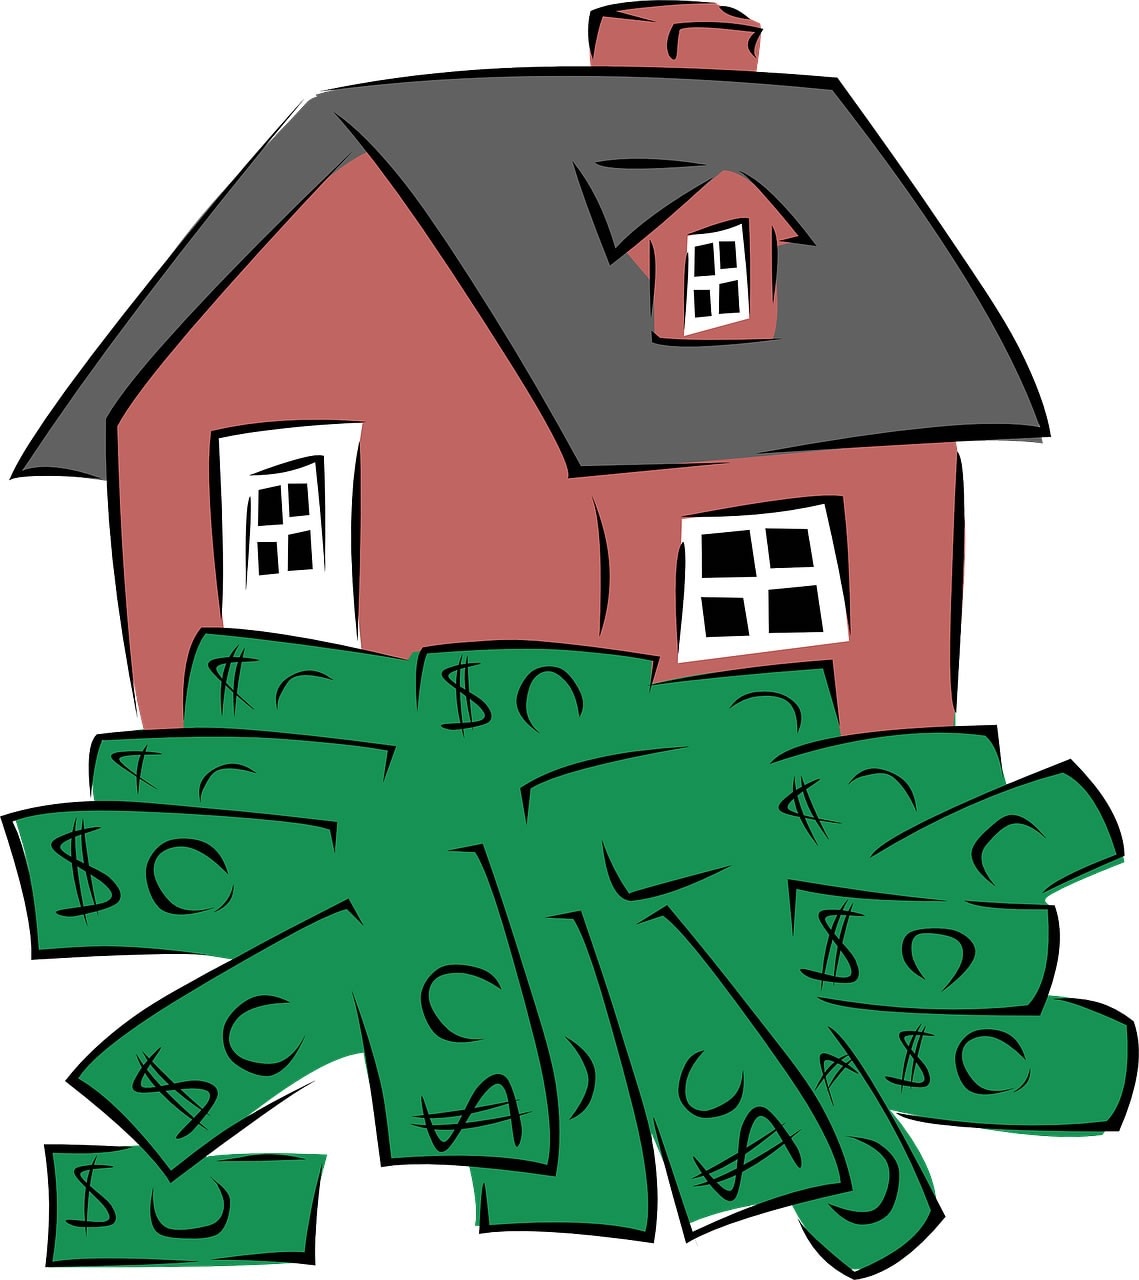 Illustration of a house representing an investment